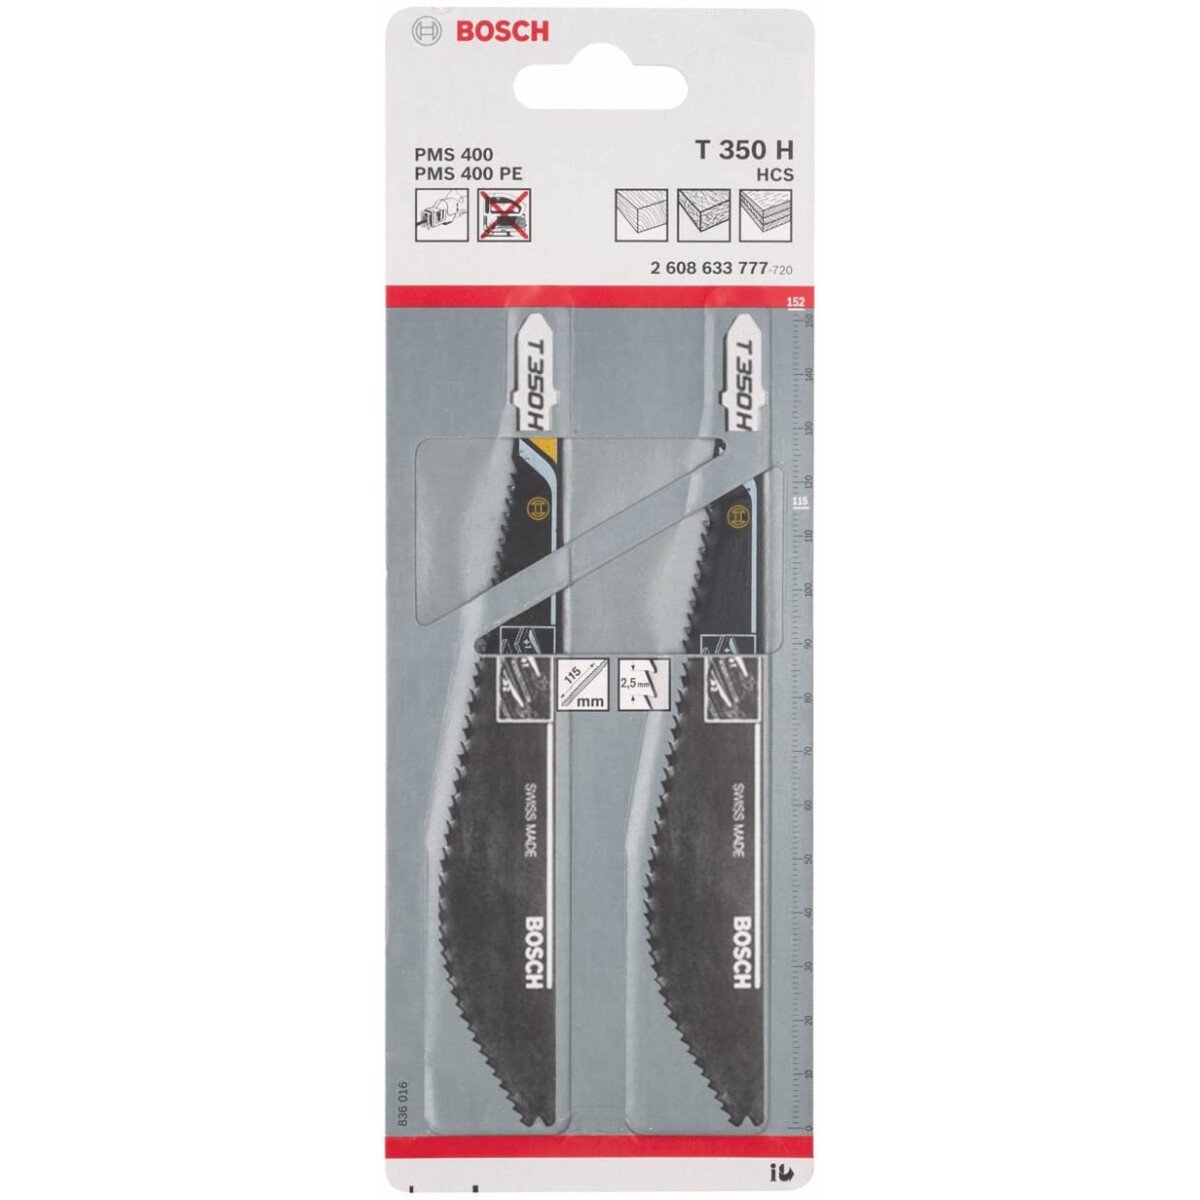 Bosch 2608633777 Multisaw blade T350 H/HCS side set and milled (10 Packs of 2)